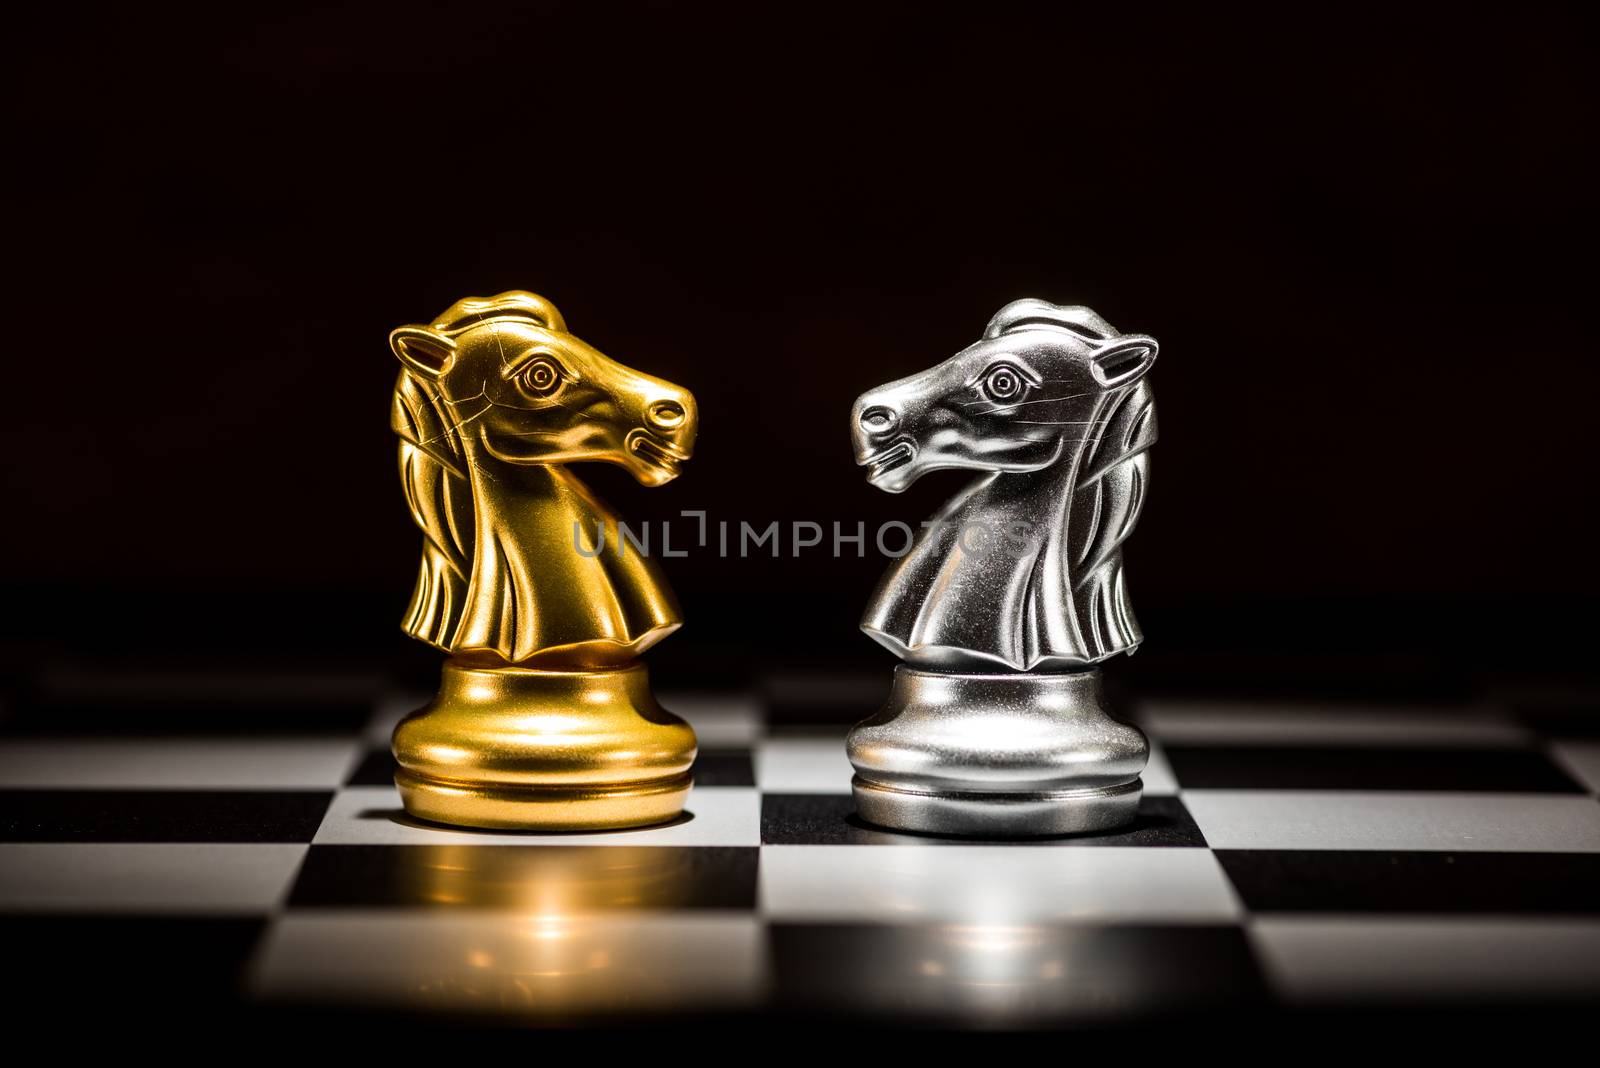 gold knight chess facing silver knight chess on chess board , business strategy concept